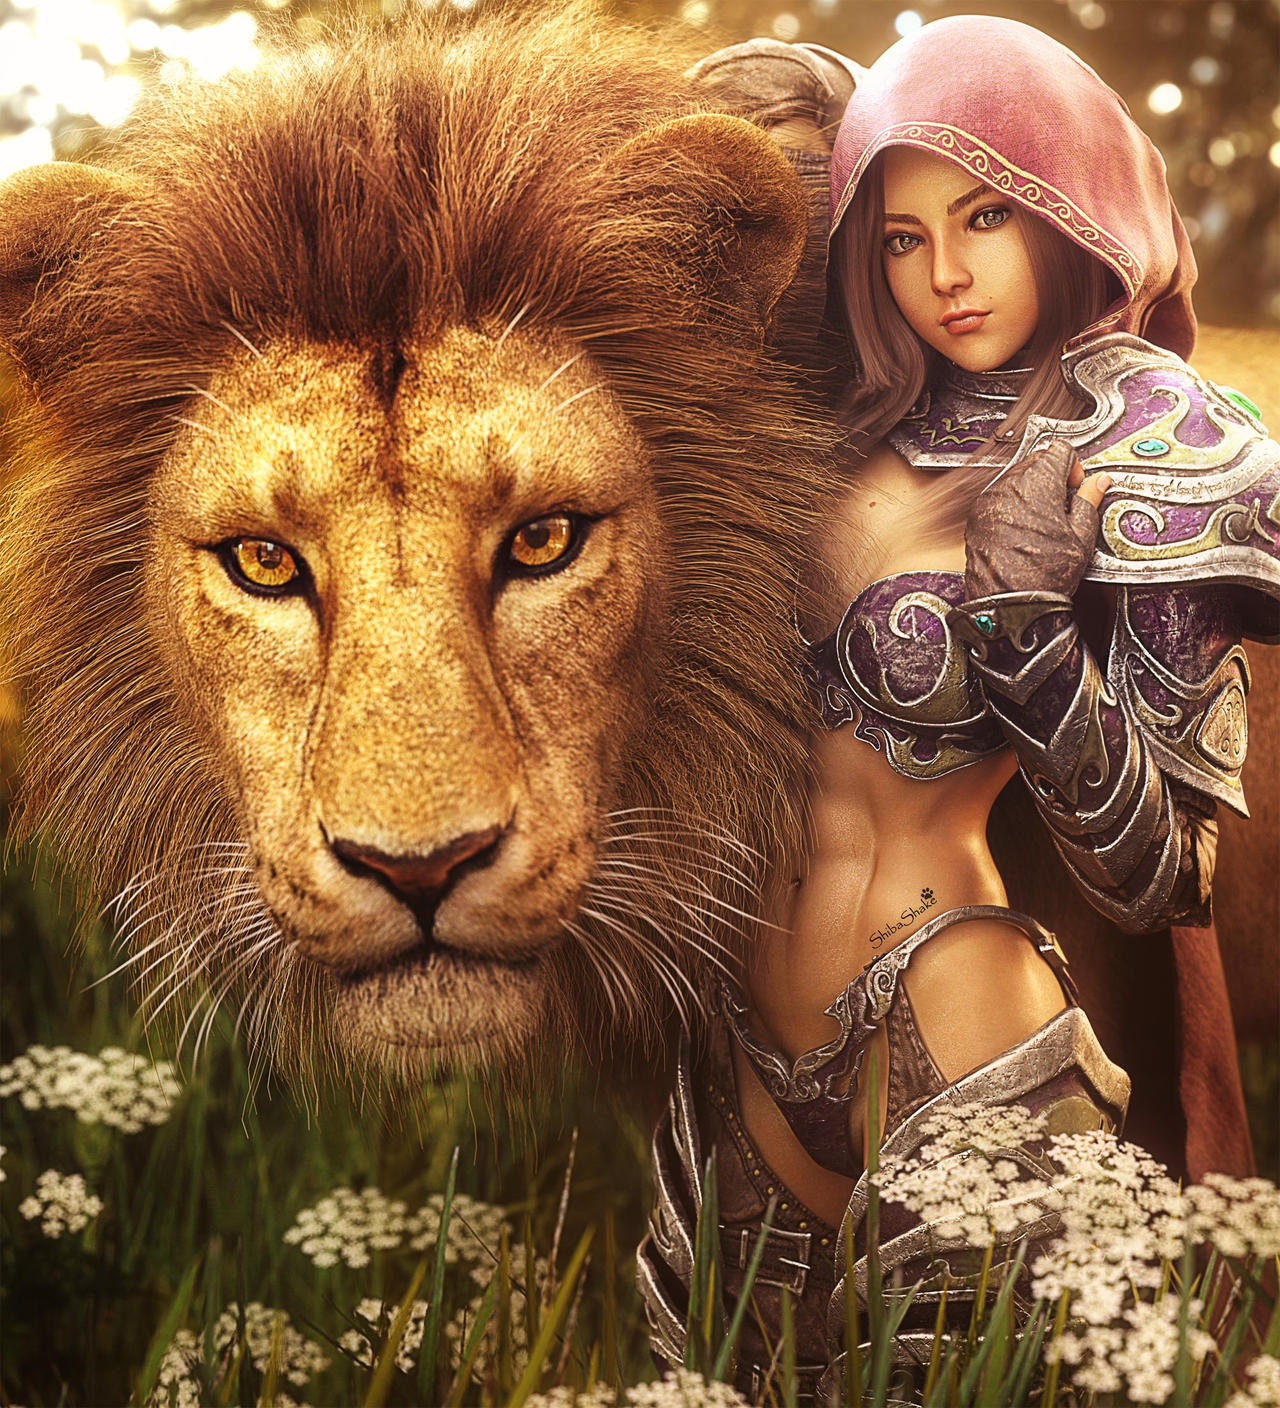 Fantasy girl in cape, hood, and armor standing next to a large lion. Fantasy woman art. Daz Studio Iray image.